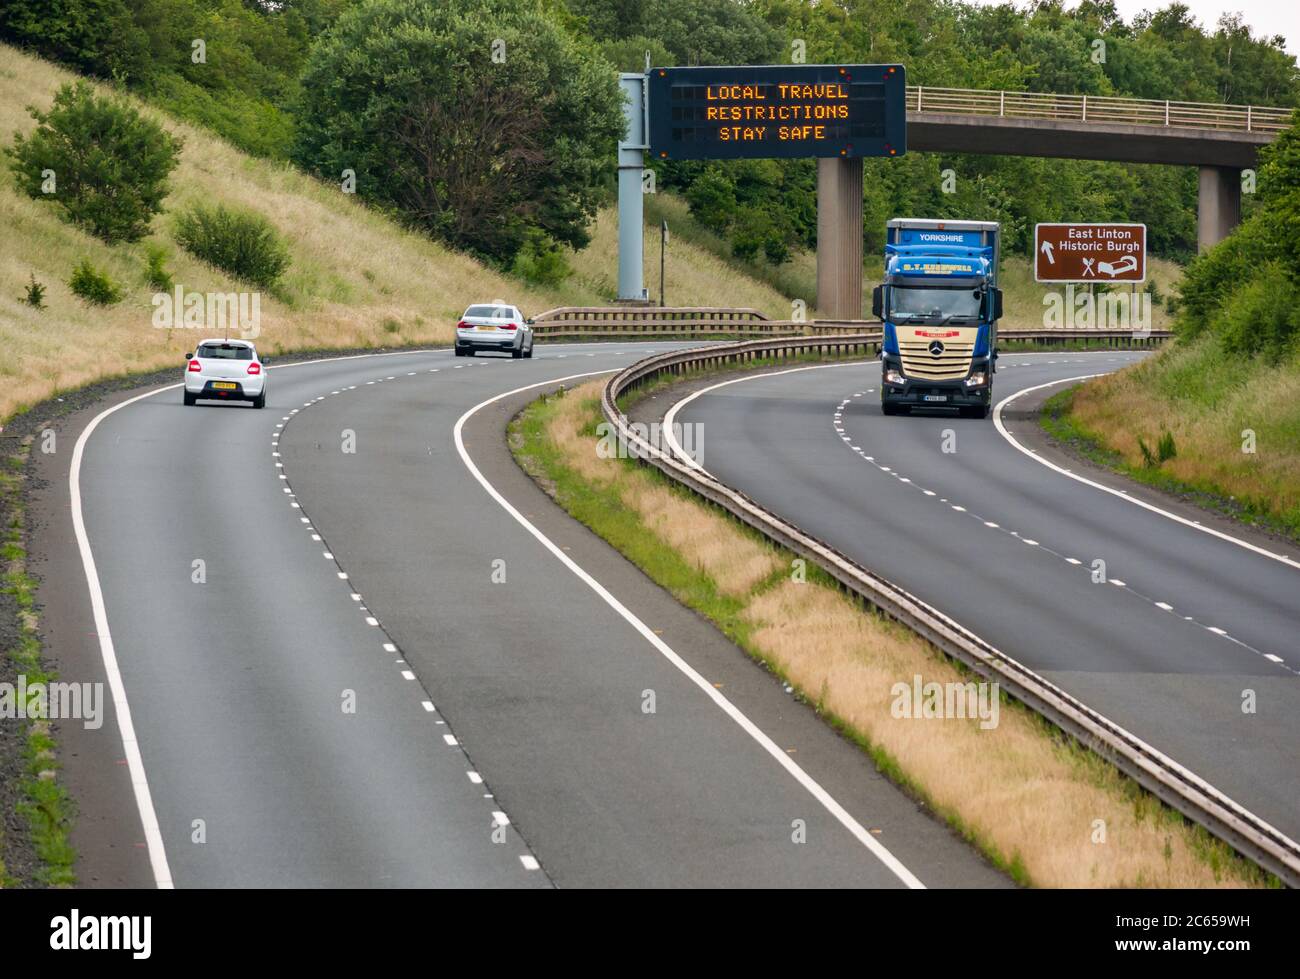 East Lothian, Scotland, United Kingdom, 7th July 2020. Covid-19 new message on A1 gantry: the third version of the pandemic message appears on overhead gantry near Haddington which reads 'Local Travel Restrictions Stay Safe' as Scotland eases into Phase 3 expected next week. The traffic on the dual carriageway is much heavier than has been apparent in recent months Stock Photo